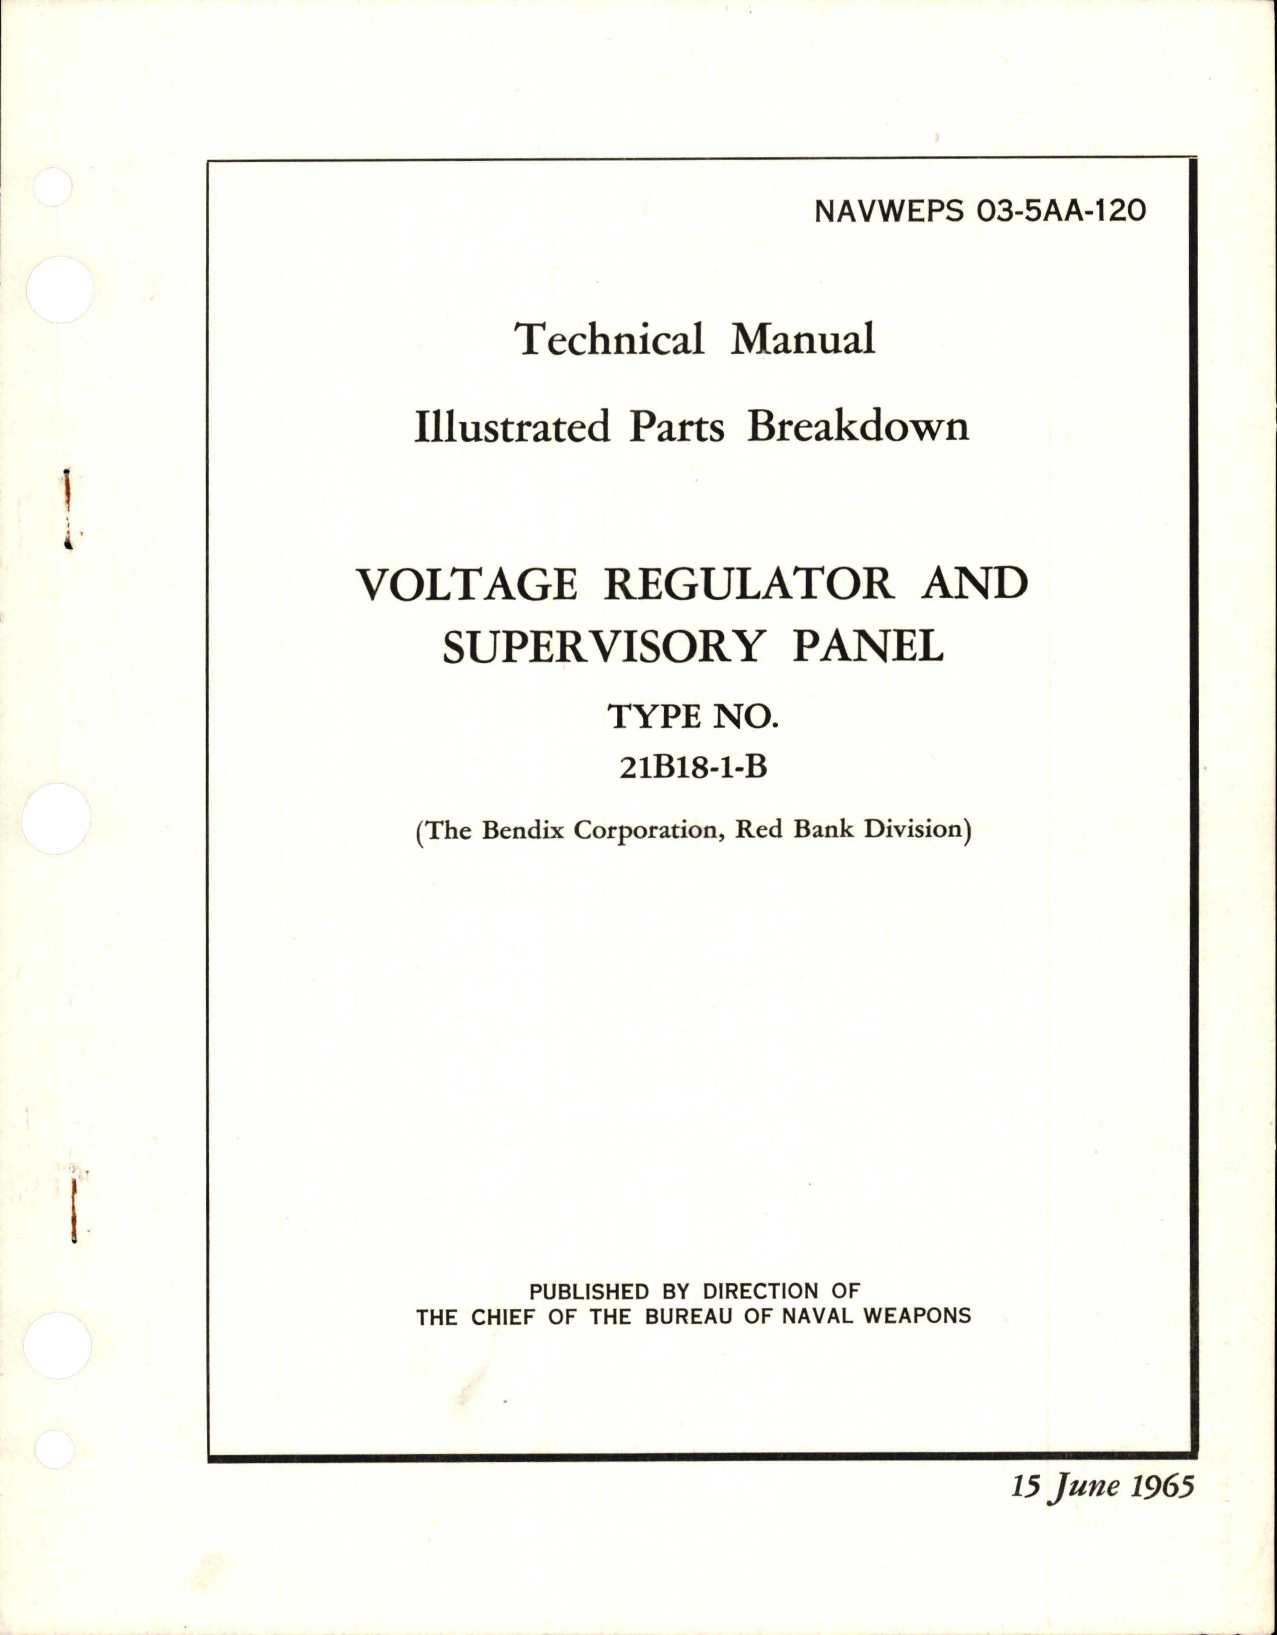 Sample page 1 from AirCorps Library document: Illustrated Parts Breakdown for Voltage Regulator & Supervisory Panel - Type 21B18-1-B